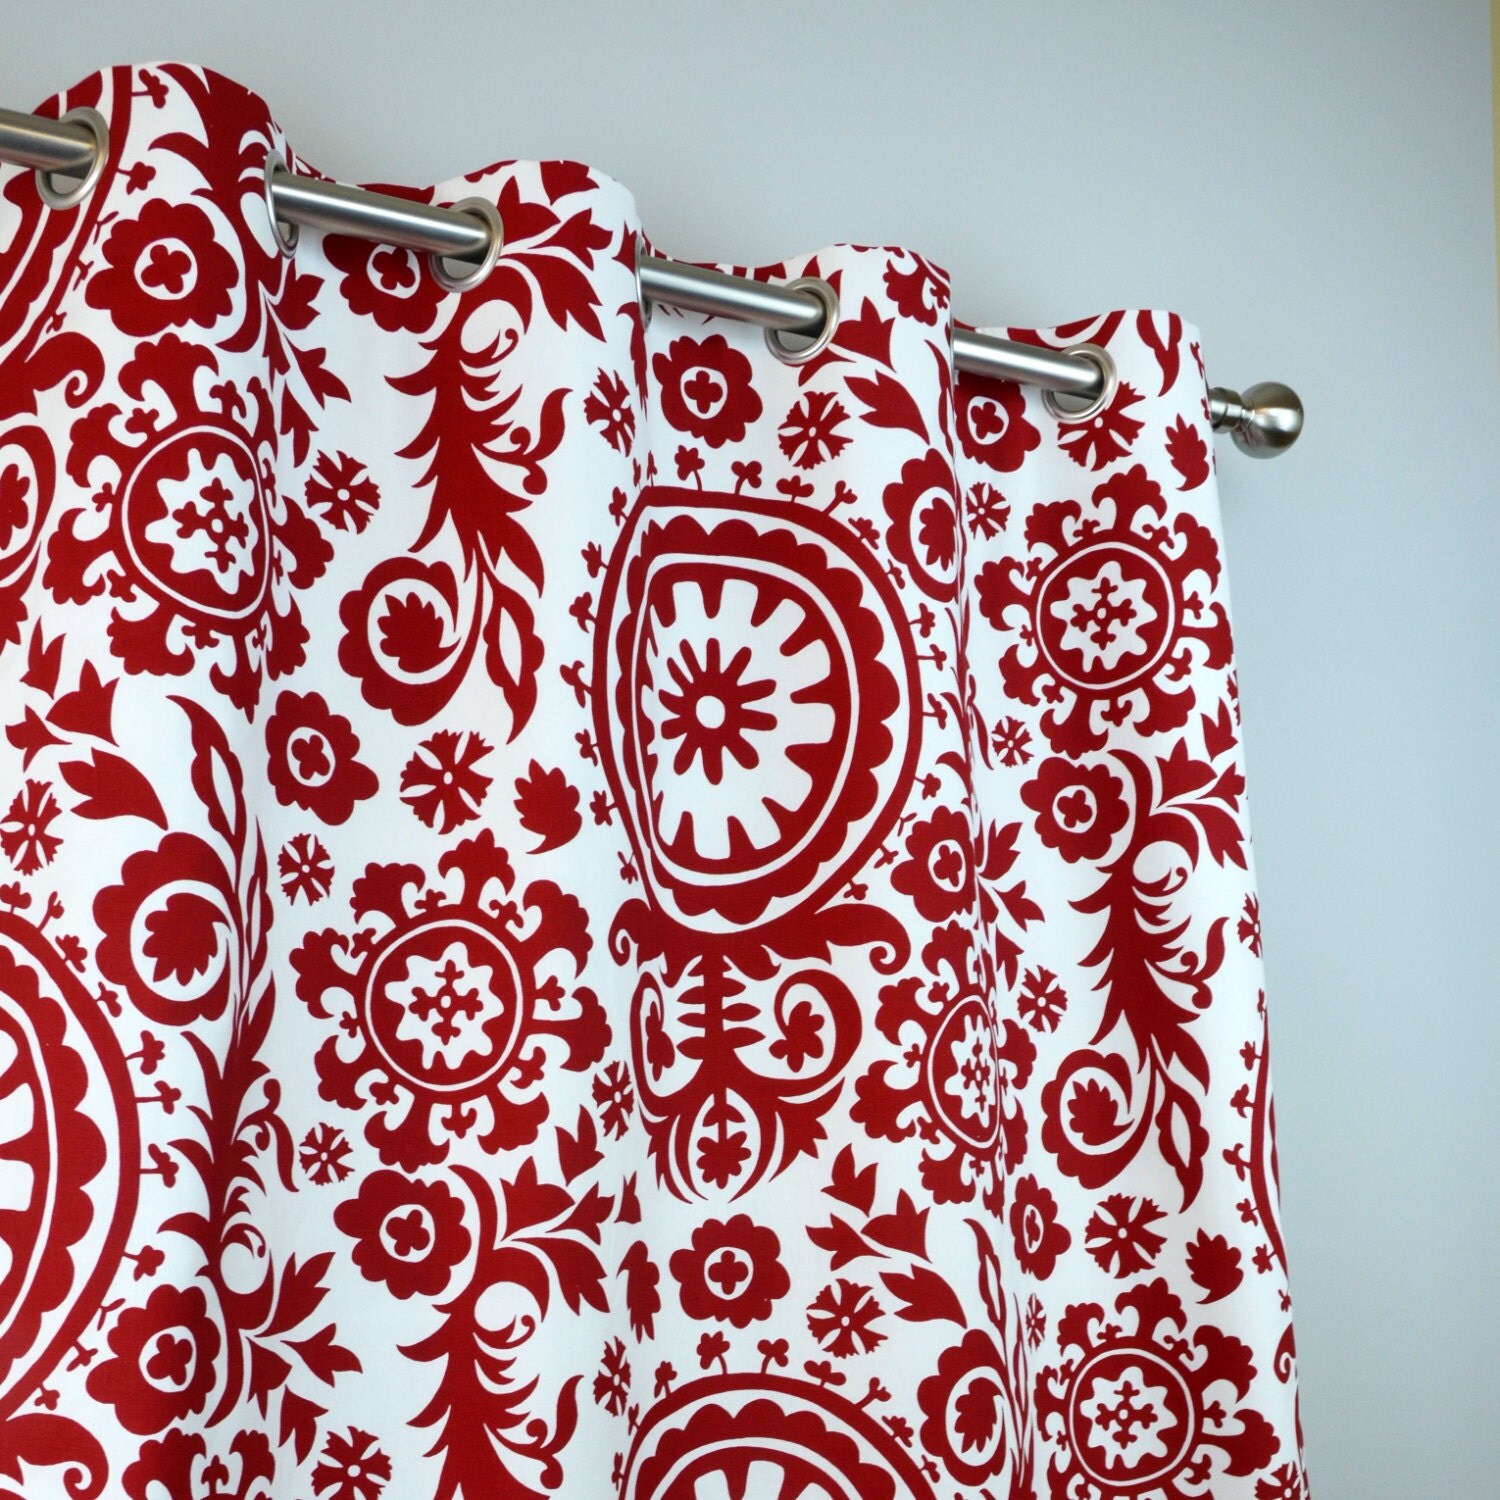 Lipstick Red White Suzani Floral Damask Curtains Grommet